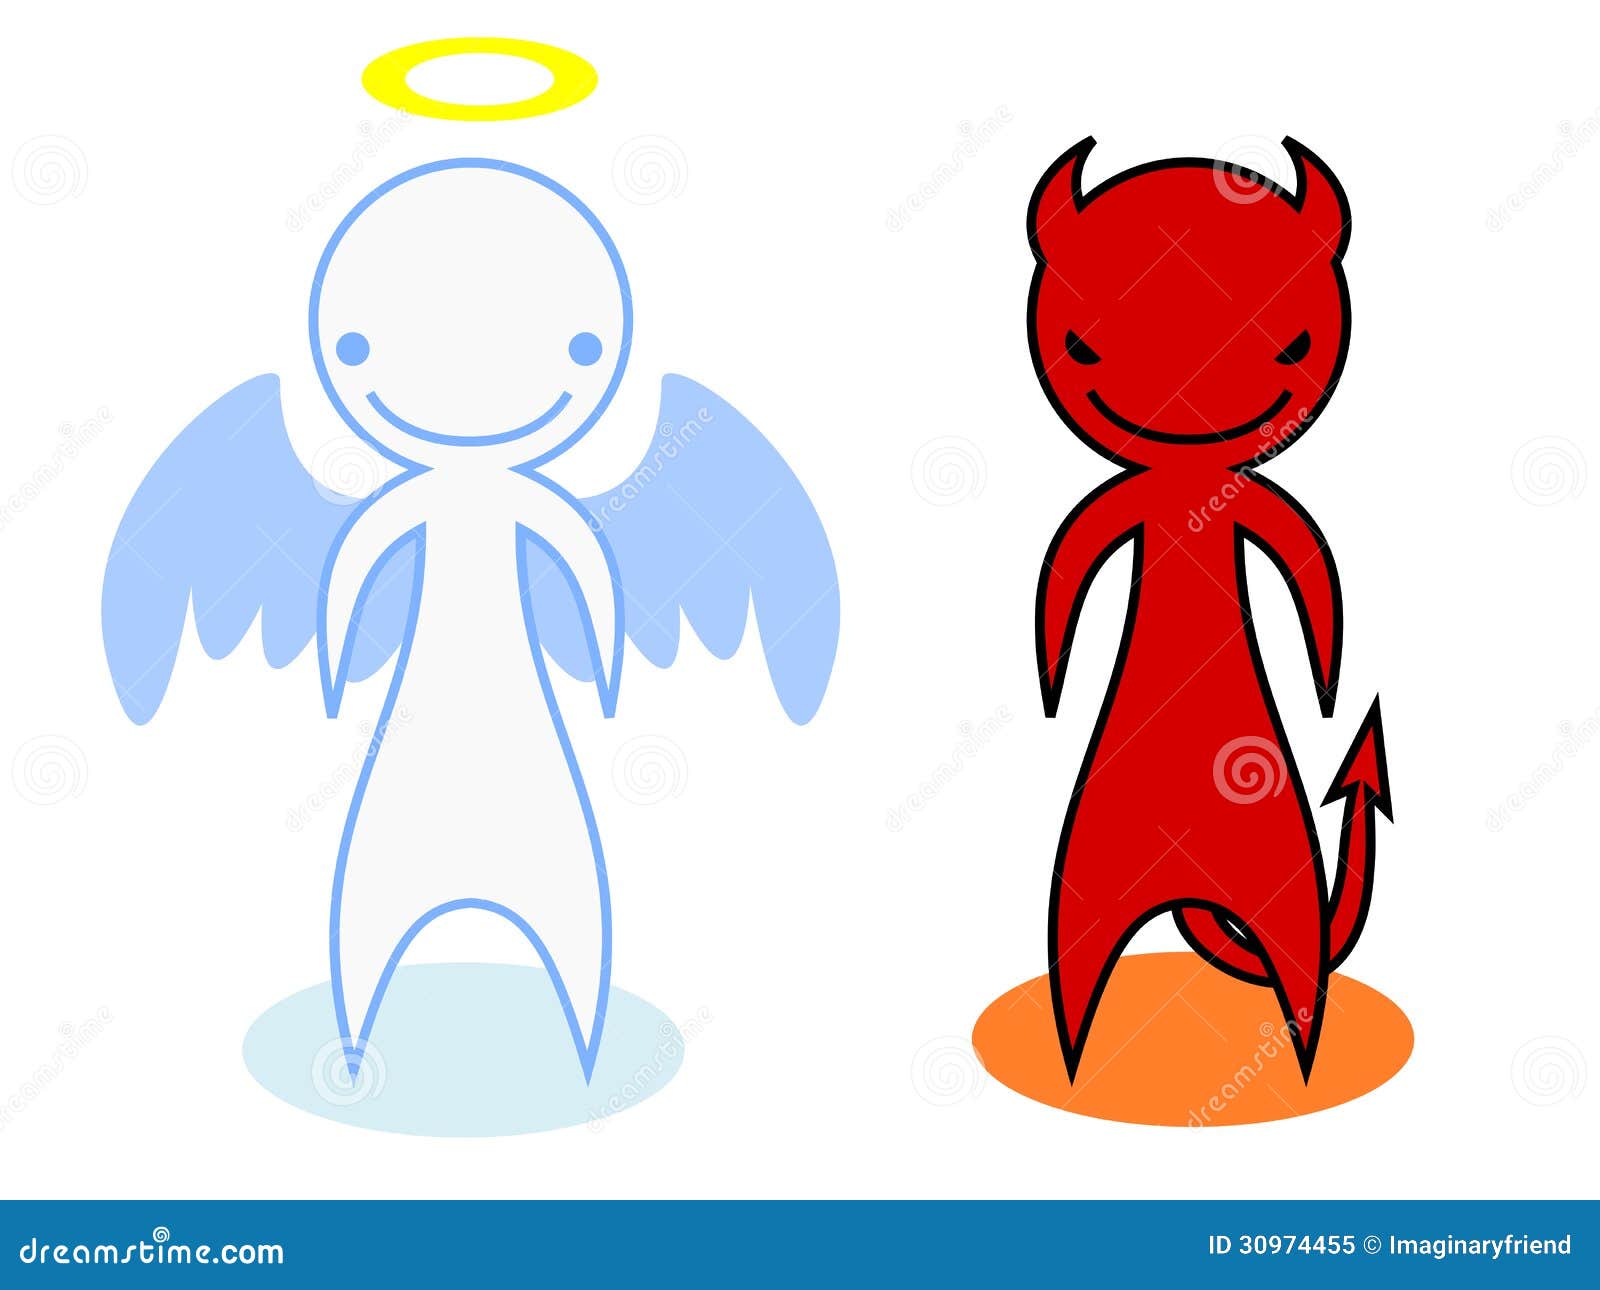 angel and devil clipart free - photo #38